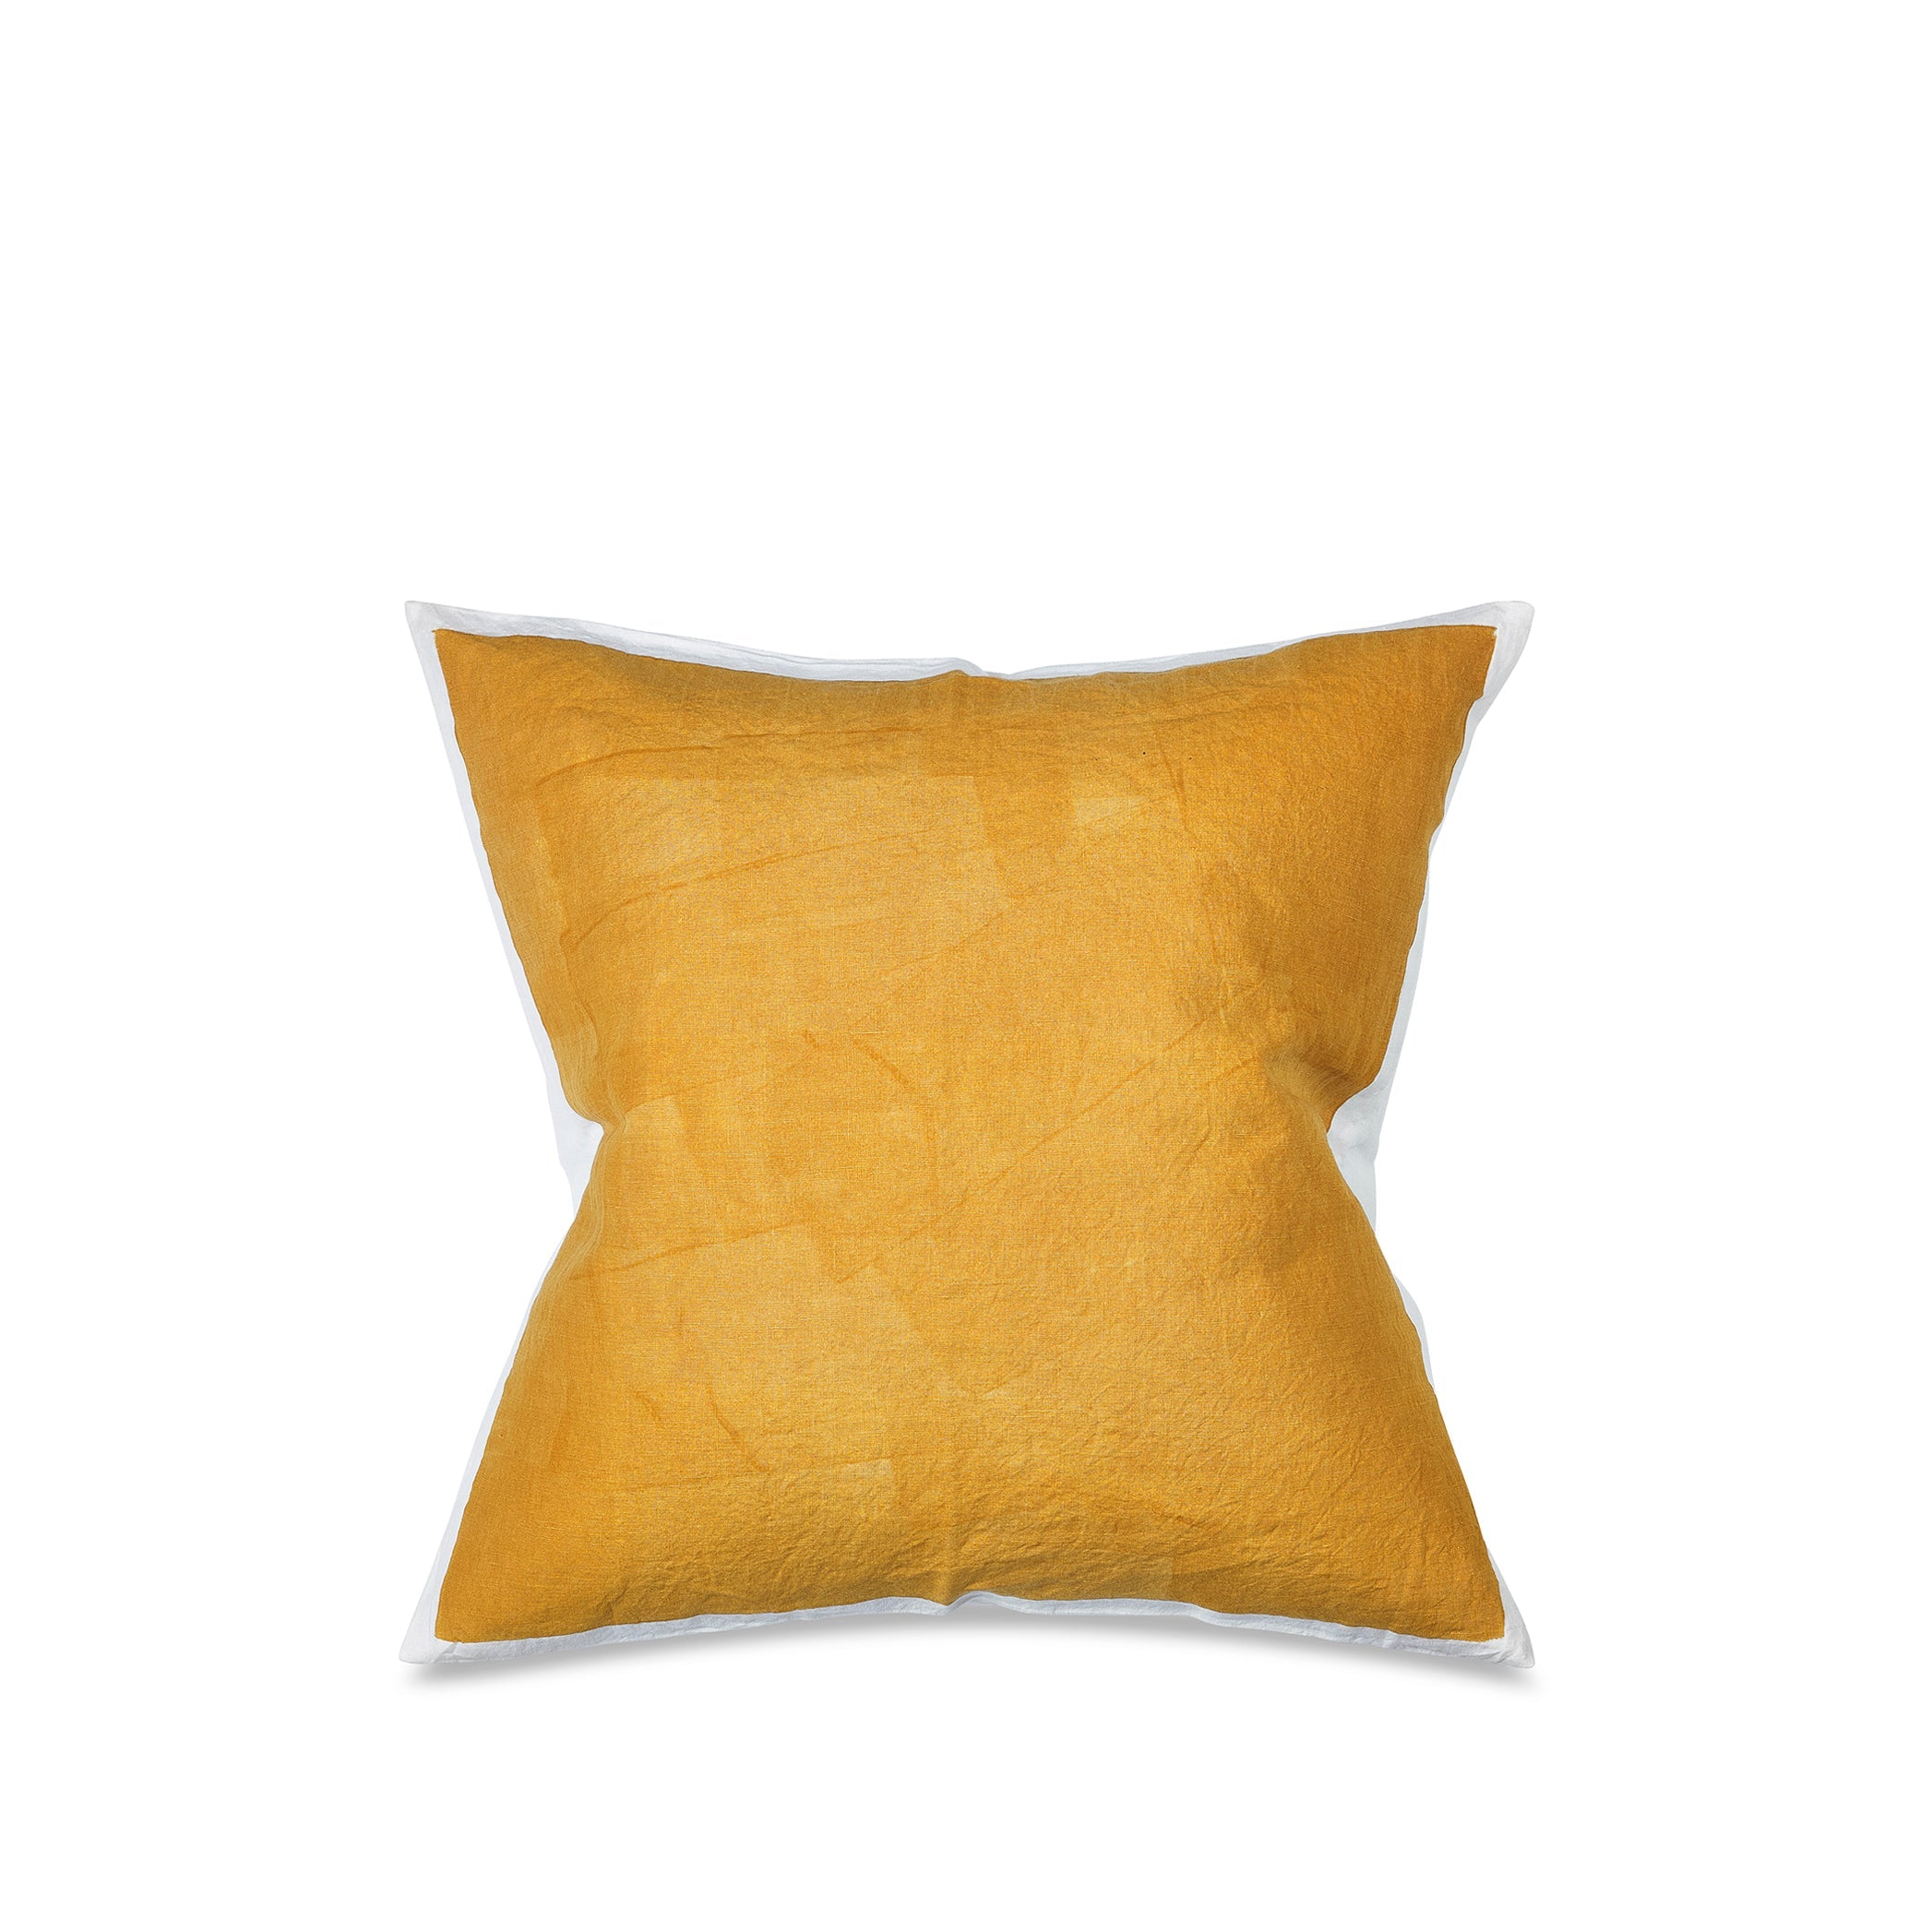 Hand Painted Linen Cushion in Mustard Yellow, 60cm x 60cm